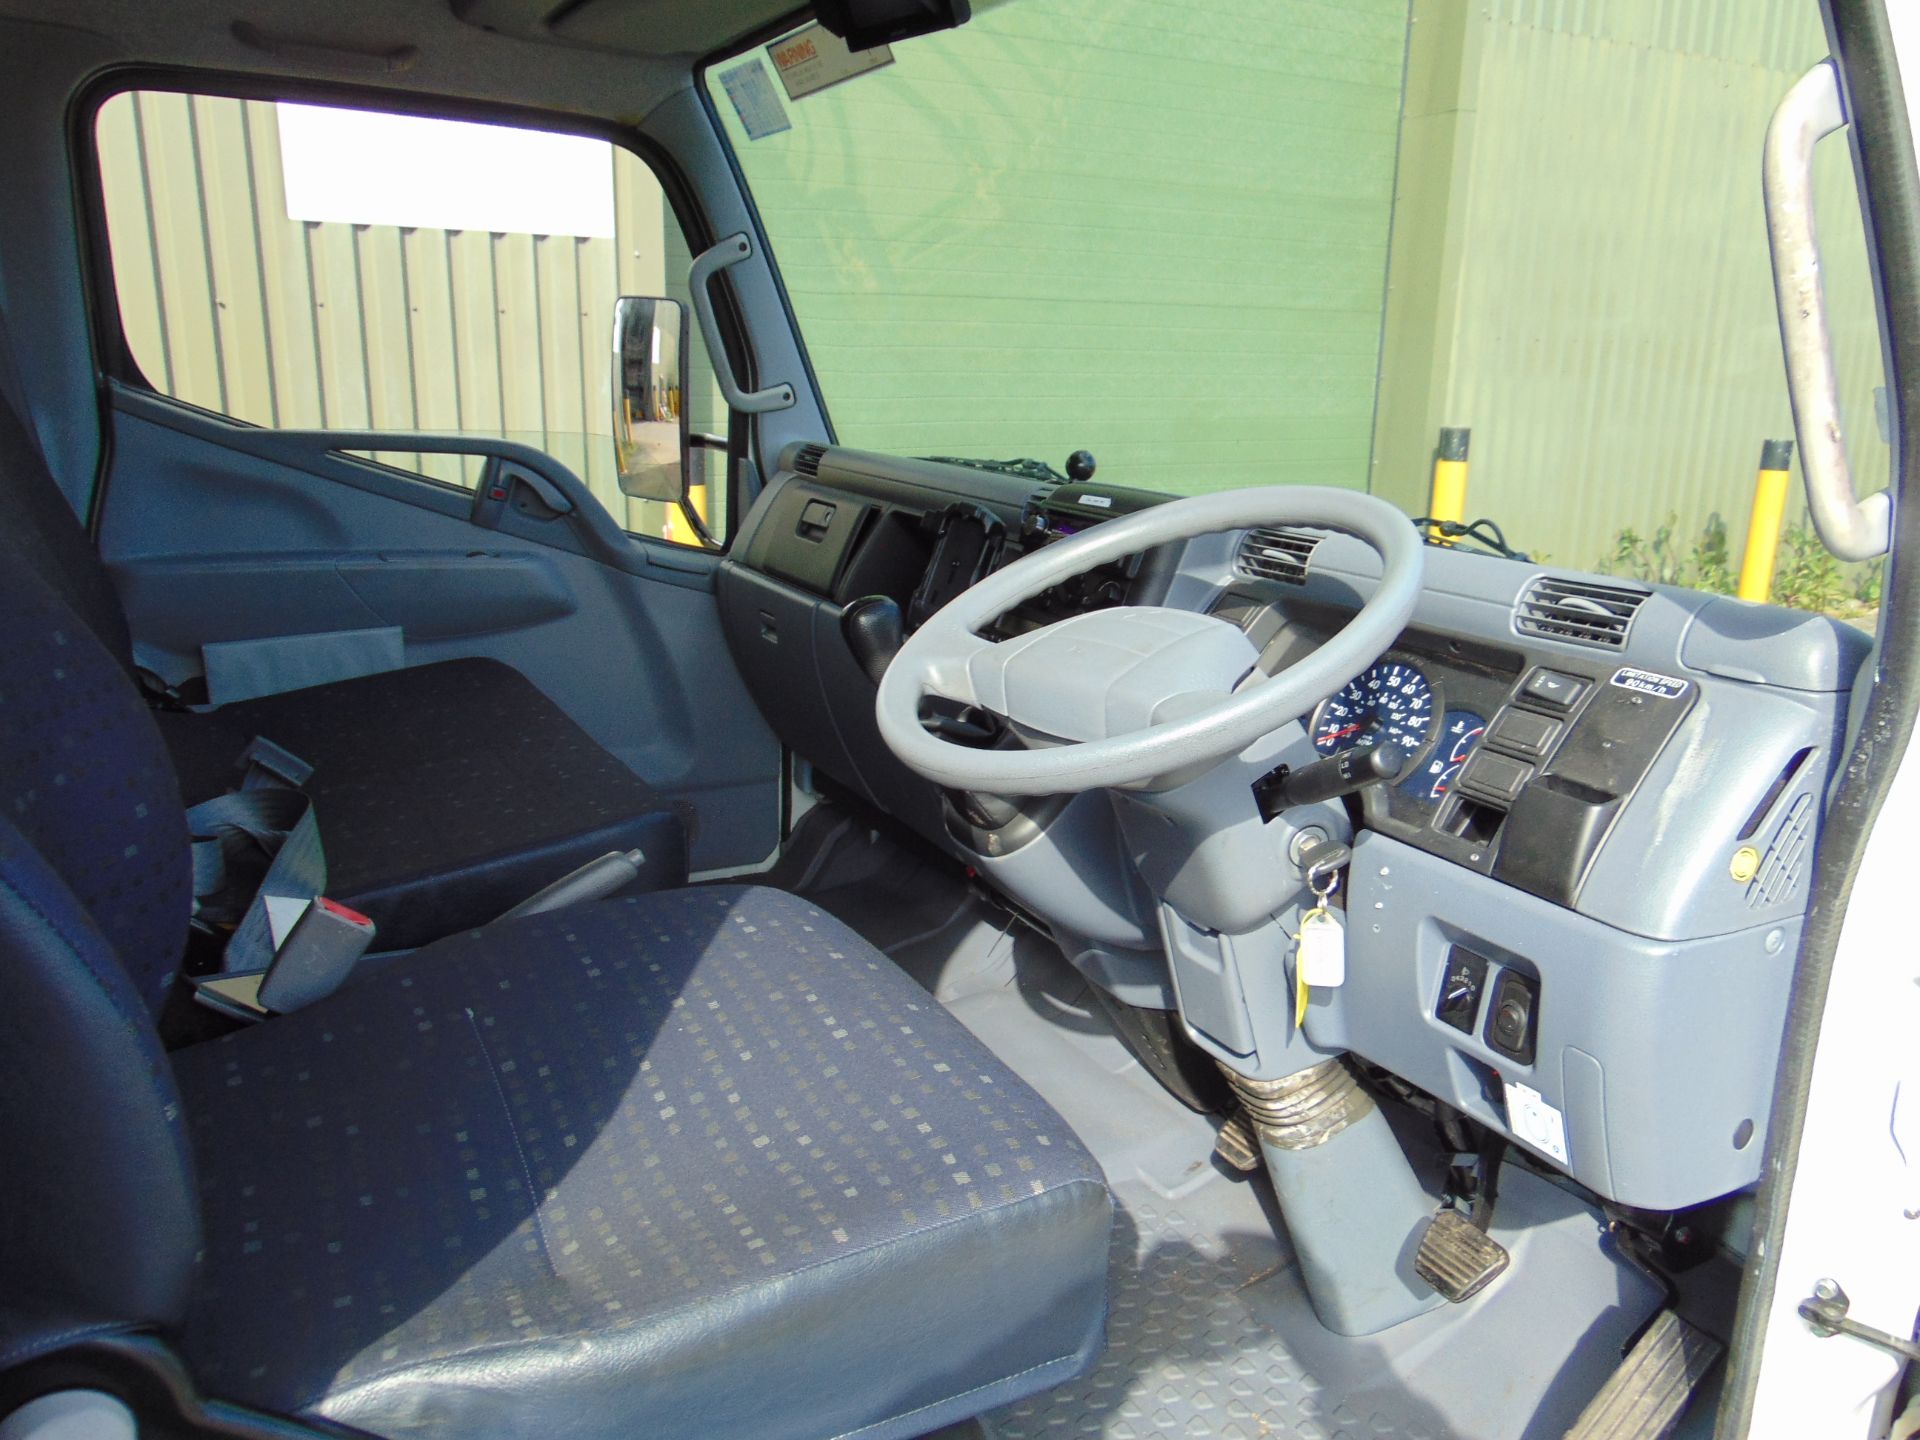 2011 Mitsubishi Fuso Canter Box lorry 7.5T - Only 5400 Miles! - Image 24 of 51